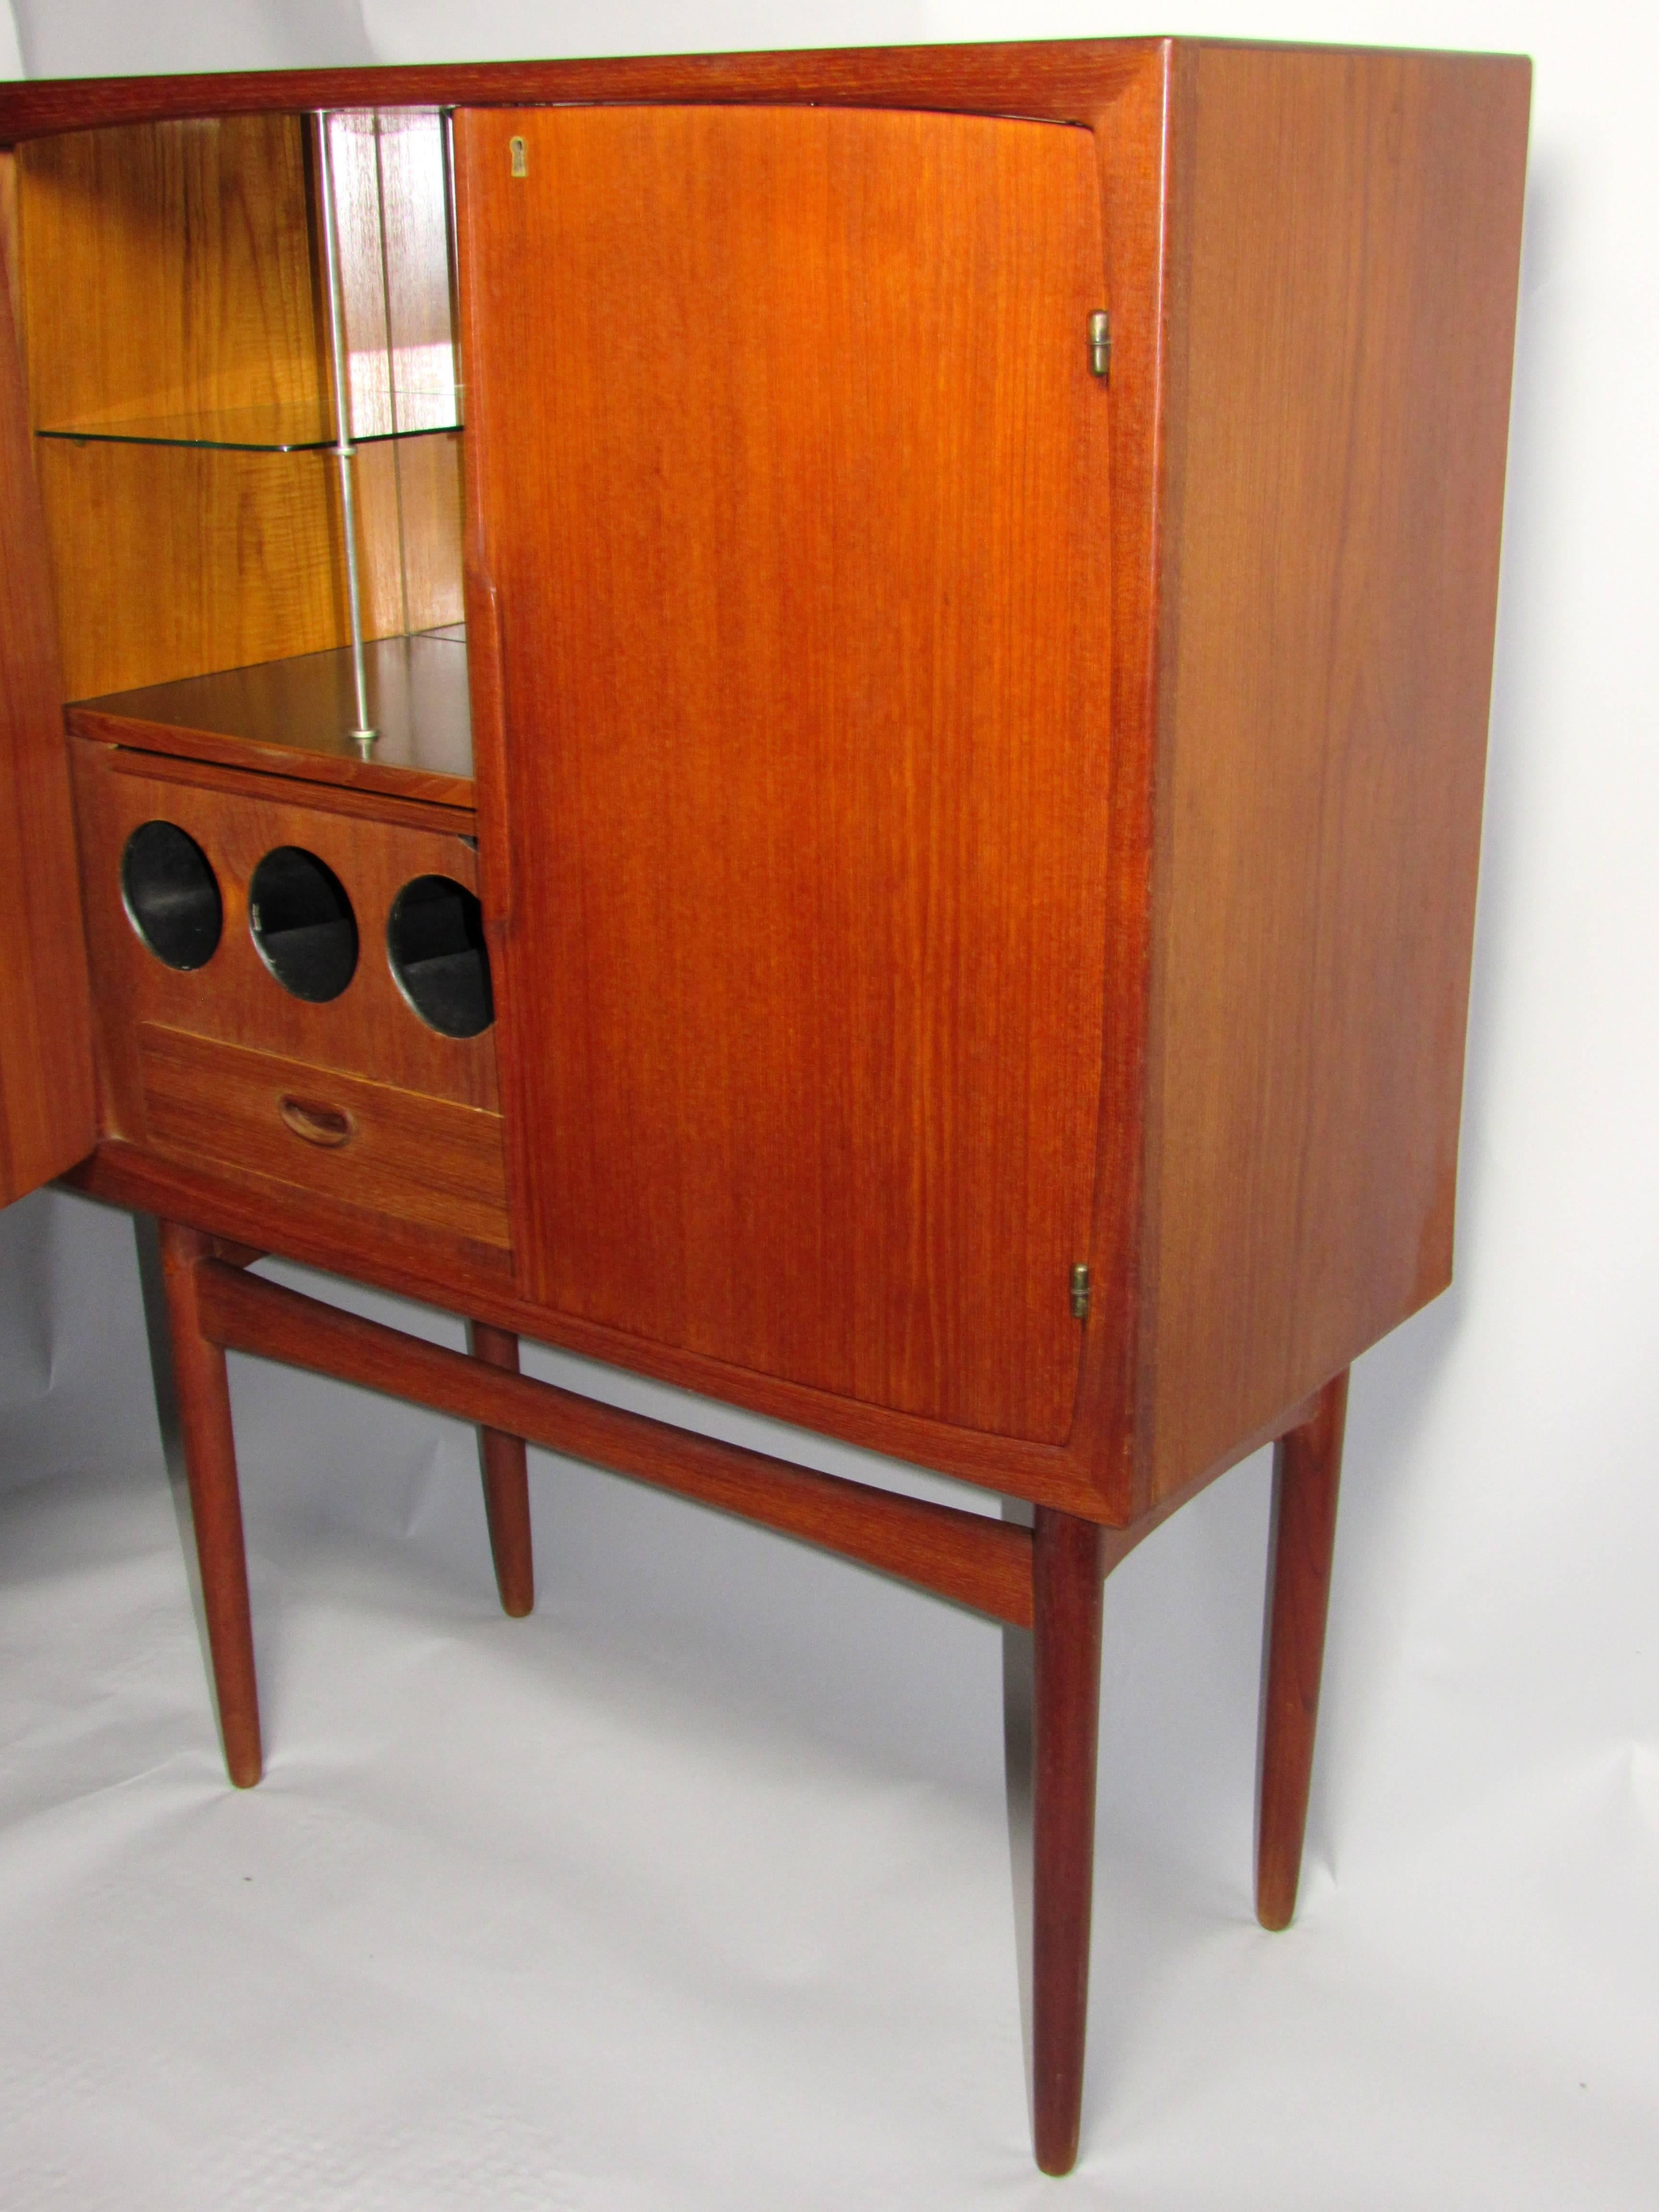 20th Century Liquor Cabinet by Torbjorn Afdal for Mellemstrand Møbelfabrik Norway circa 1952